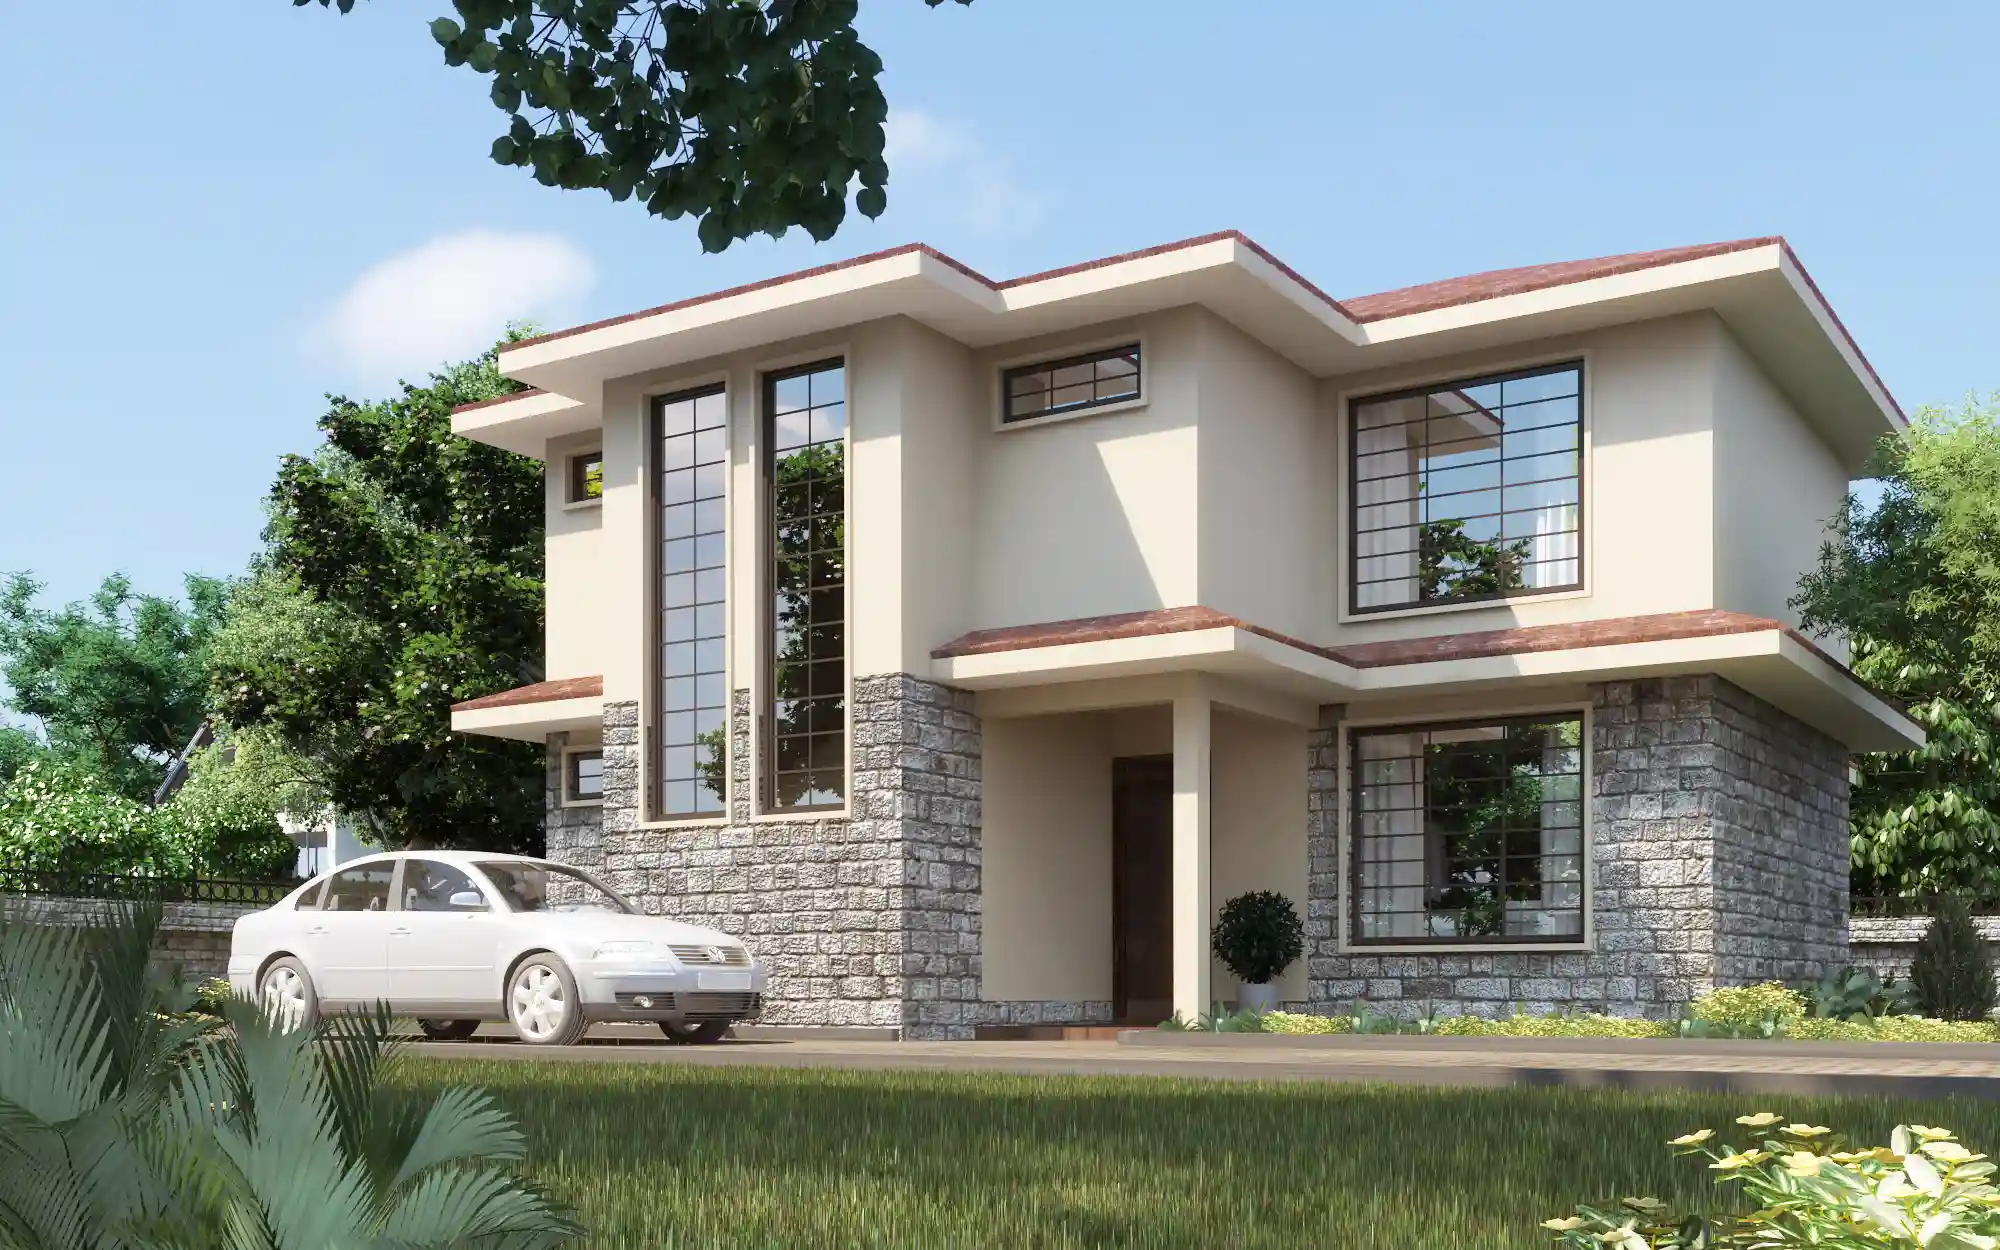 4 Bedroom Maisonette - ID 4211 - INUUA 4 BED MAST TP1 OP1-4211_FRONT_VIEW.jpg from Inuua Tujenge house plans with 4 bedrooms and 3 bathrooms. ( maisonette )